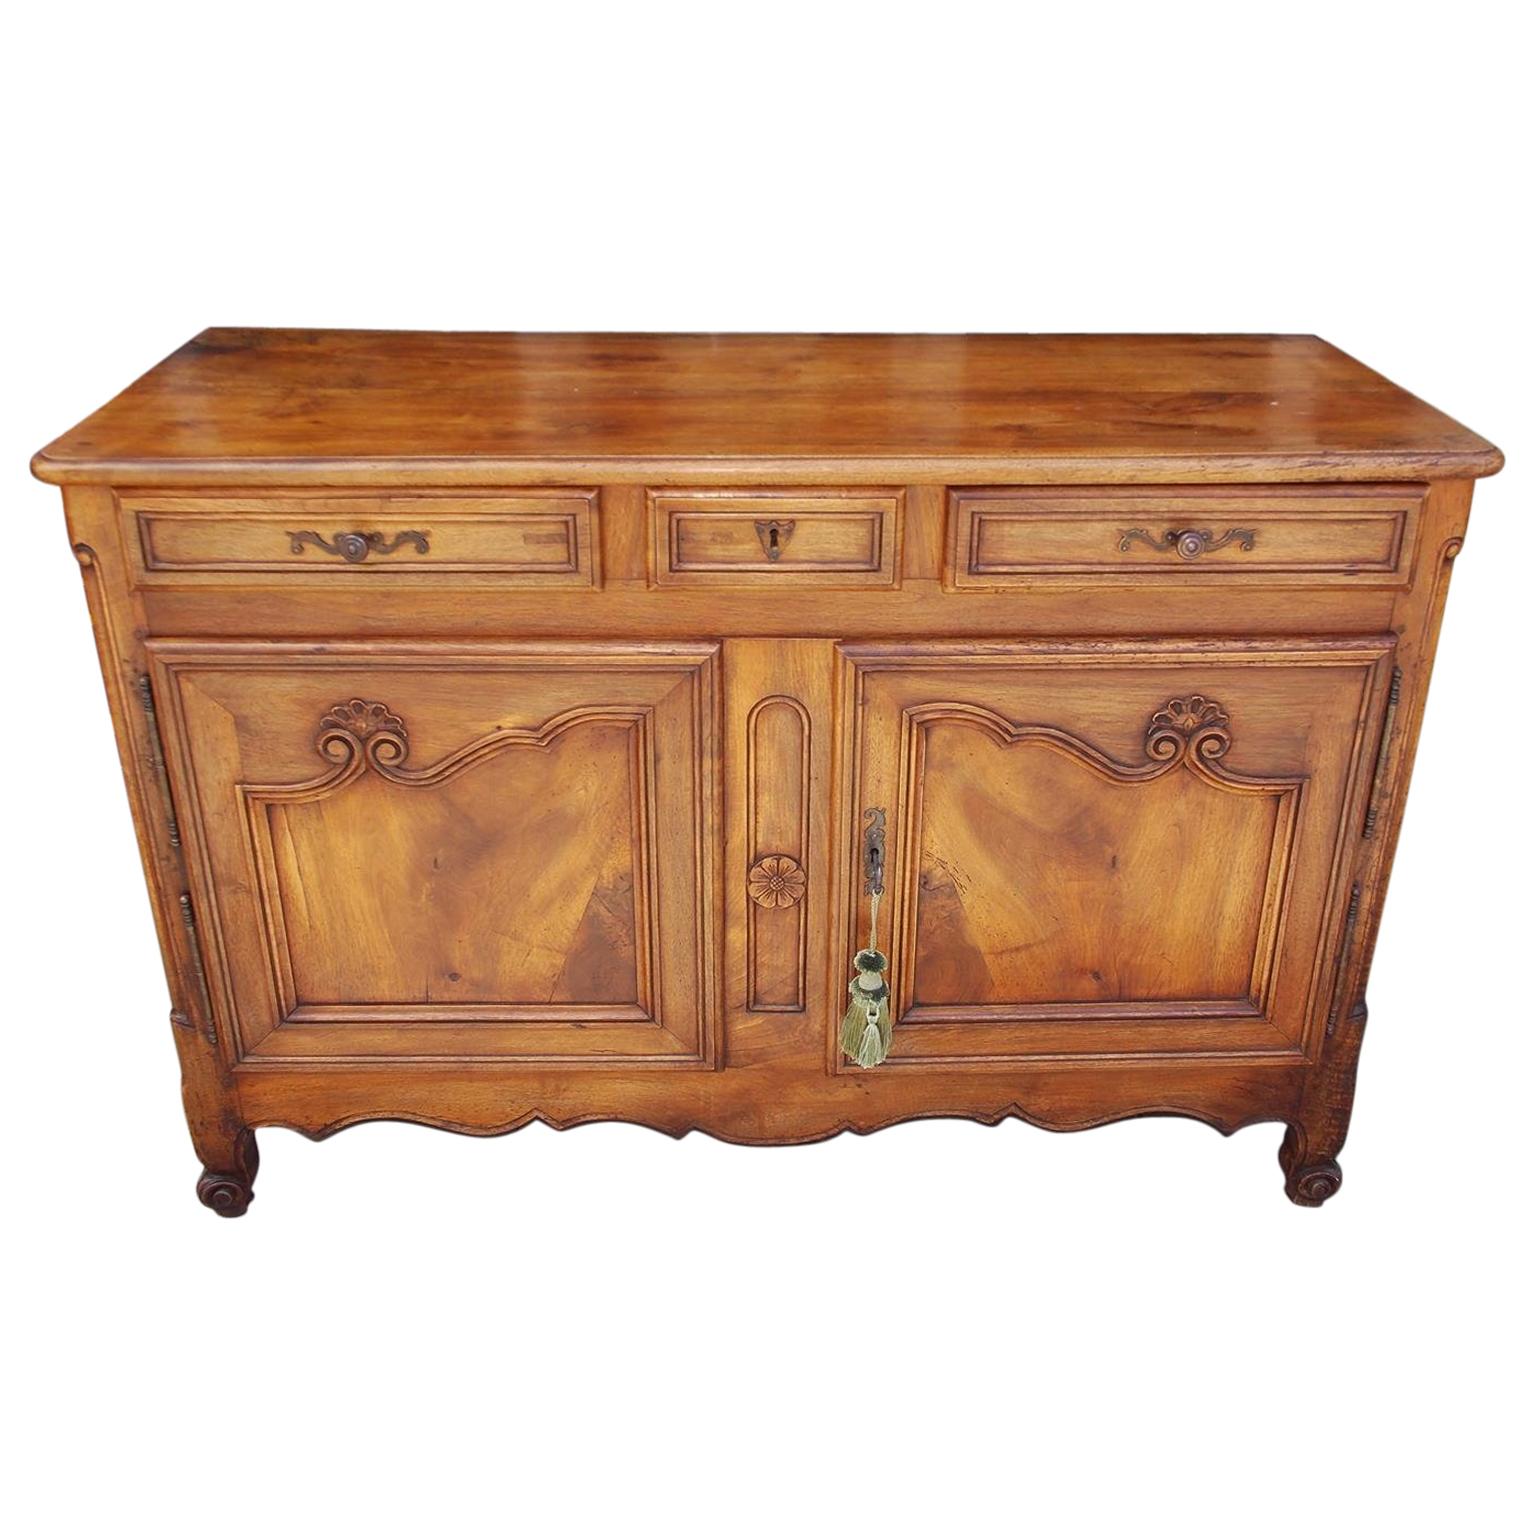 French Provinicial Cherry Three-Drawer Server with Flanking Cabinet Doors, 1810